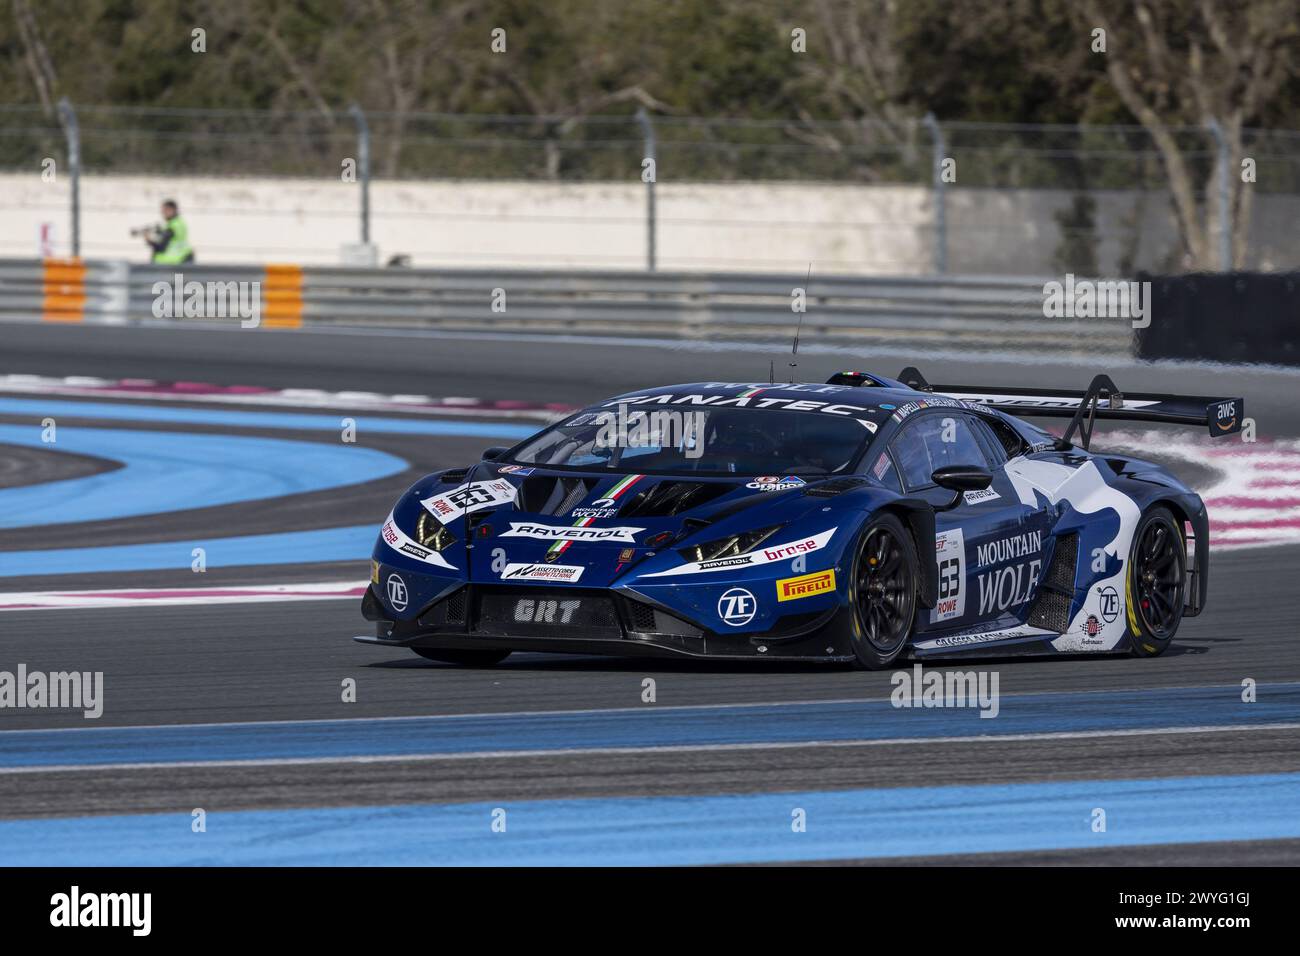 163 ENGELHART Christian (ger), PERERA Franck (fra), MAPELLI Marco (ita), GRT - Grasser Racing Team, Lamborghini GT3 Evo, action during the 1st round of the 2024 Fanatec GT World Challenge powered by AWS on the Circuit Paul Ricard, from April 5 to 7, 2024 in Le Castellet, France Stock Photo